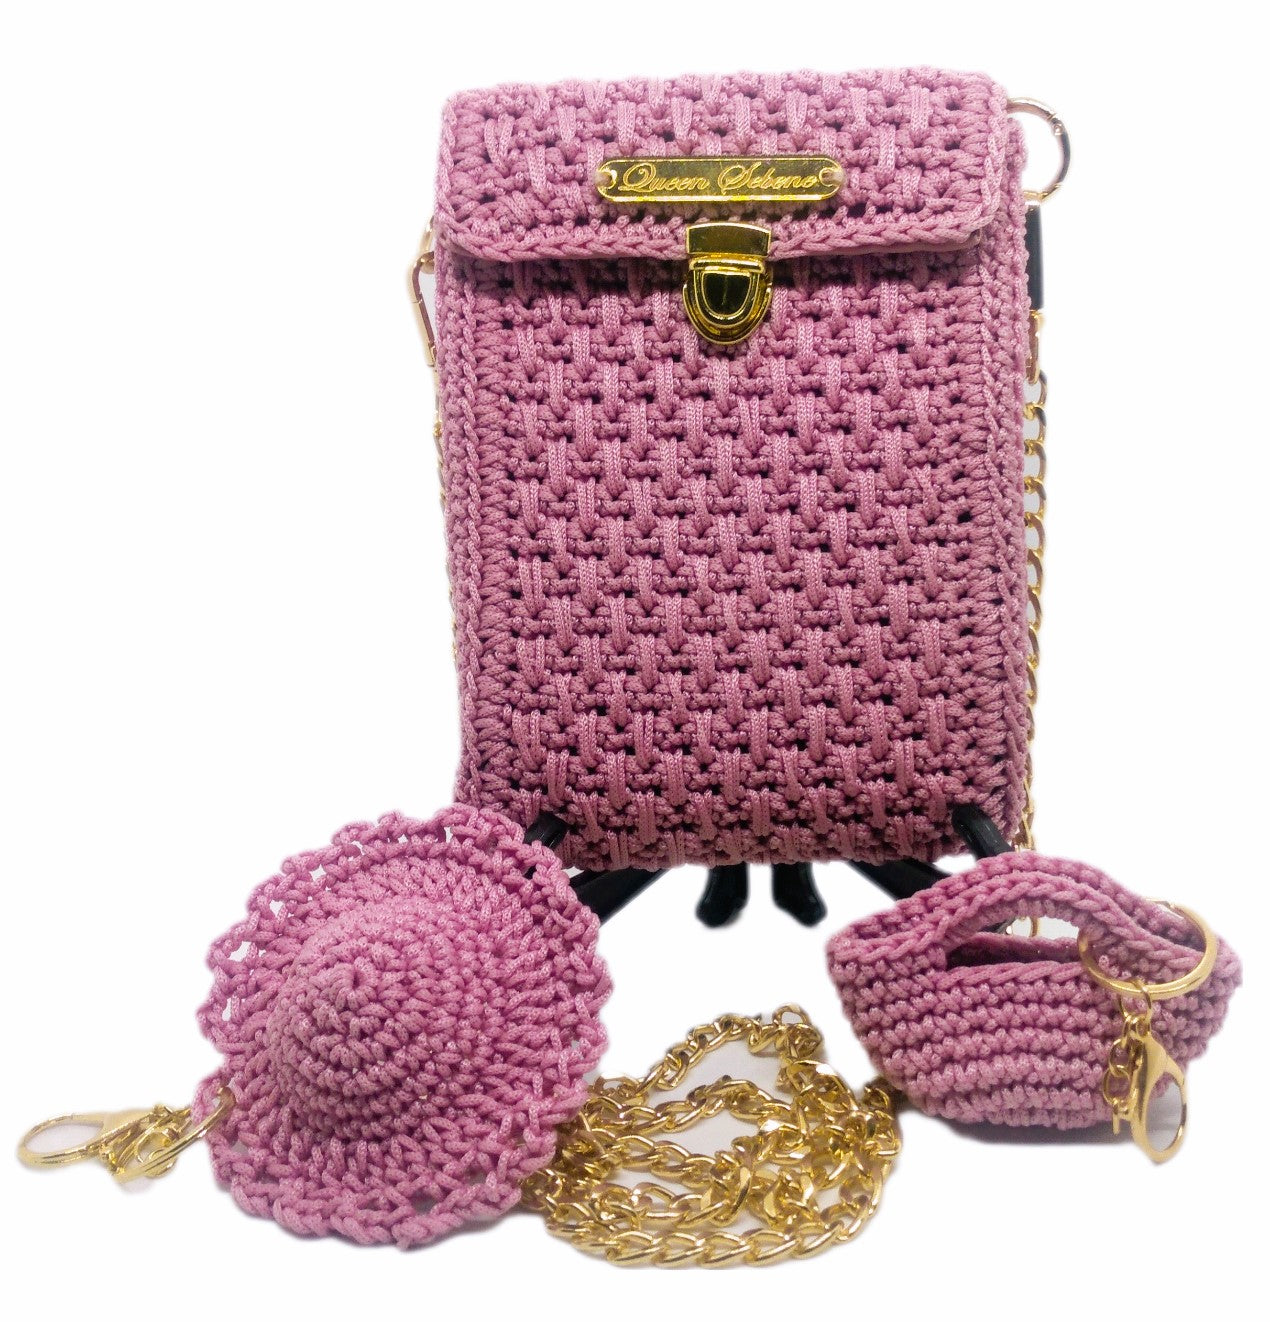 Front view of pink crochet crossbody bag, hat and purse keychains